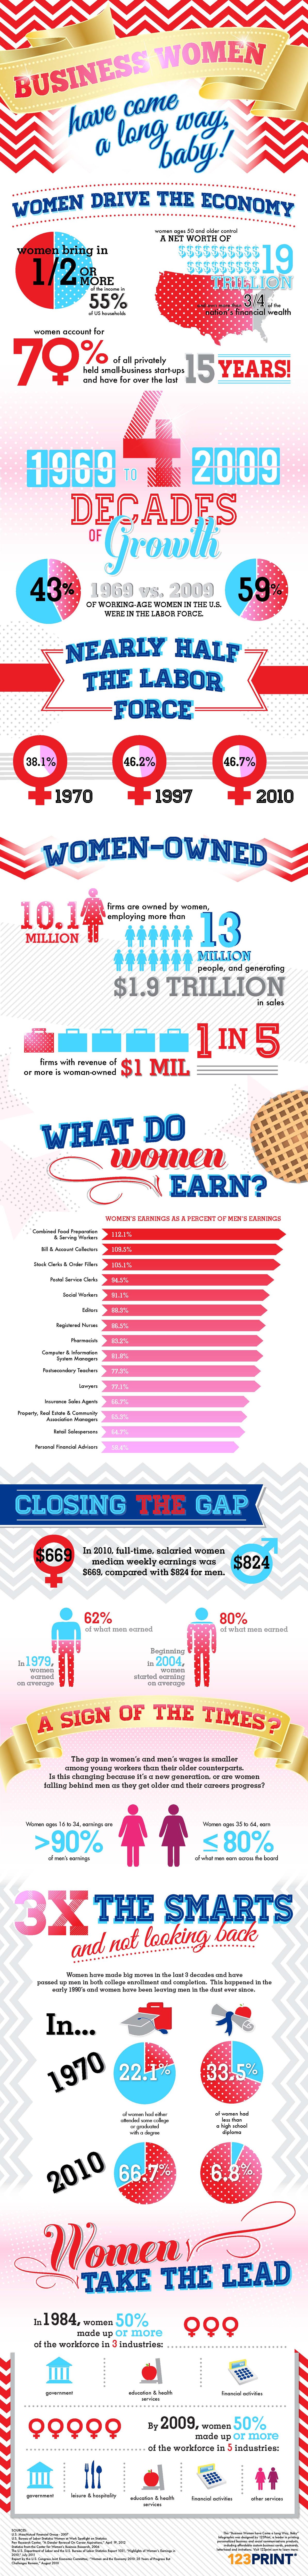 123Print Business Women Have Come A Long Way Infographic